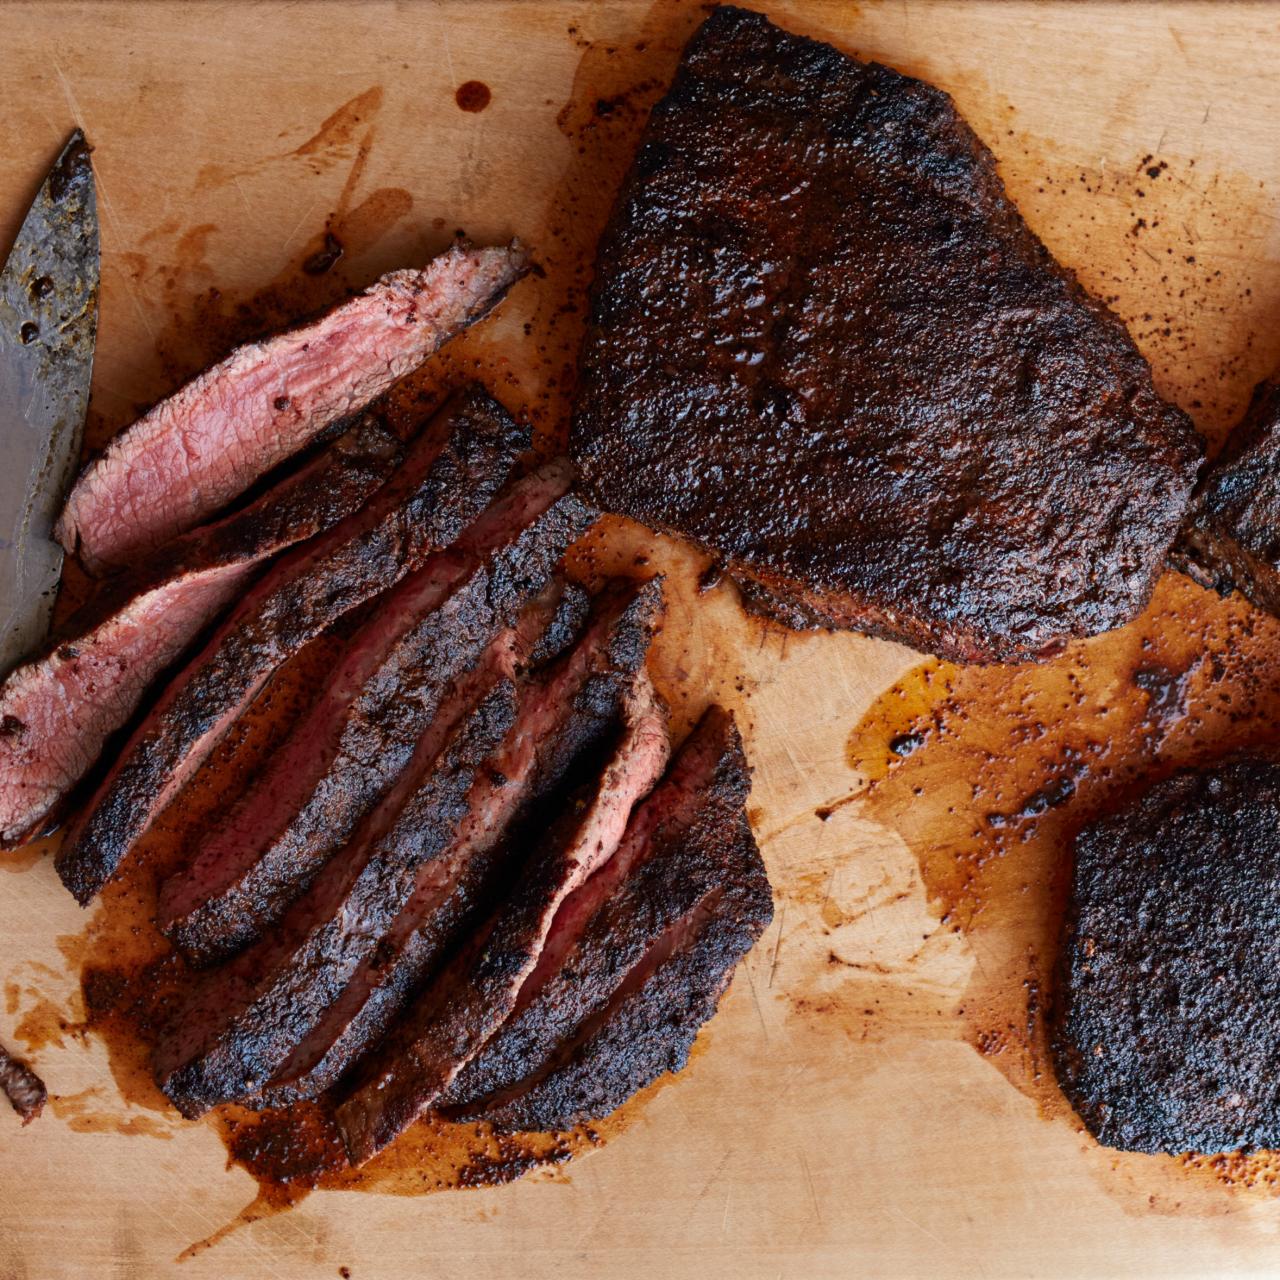 https://food.fnr.sndimg.com/content/dam/images/food/fullset/2014/5/14/1/FNM_060114-Chili-and-Coffee-Rubbed-Steaks-Recipe_s4x3.jpg.rend.hgtvcom.1280.1280.suffix/1400182242882.jpeg